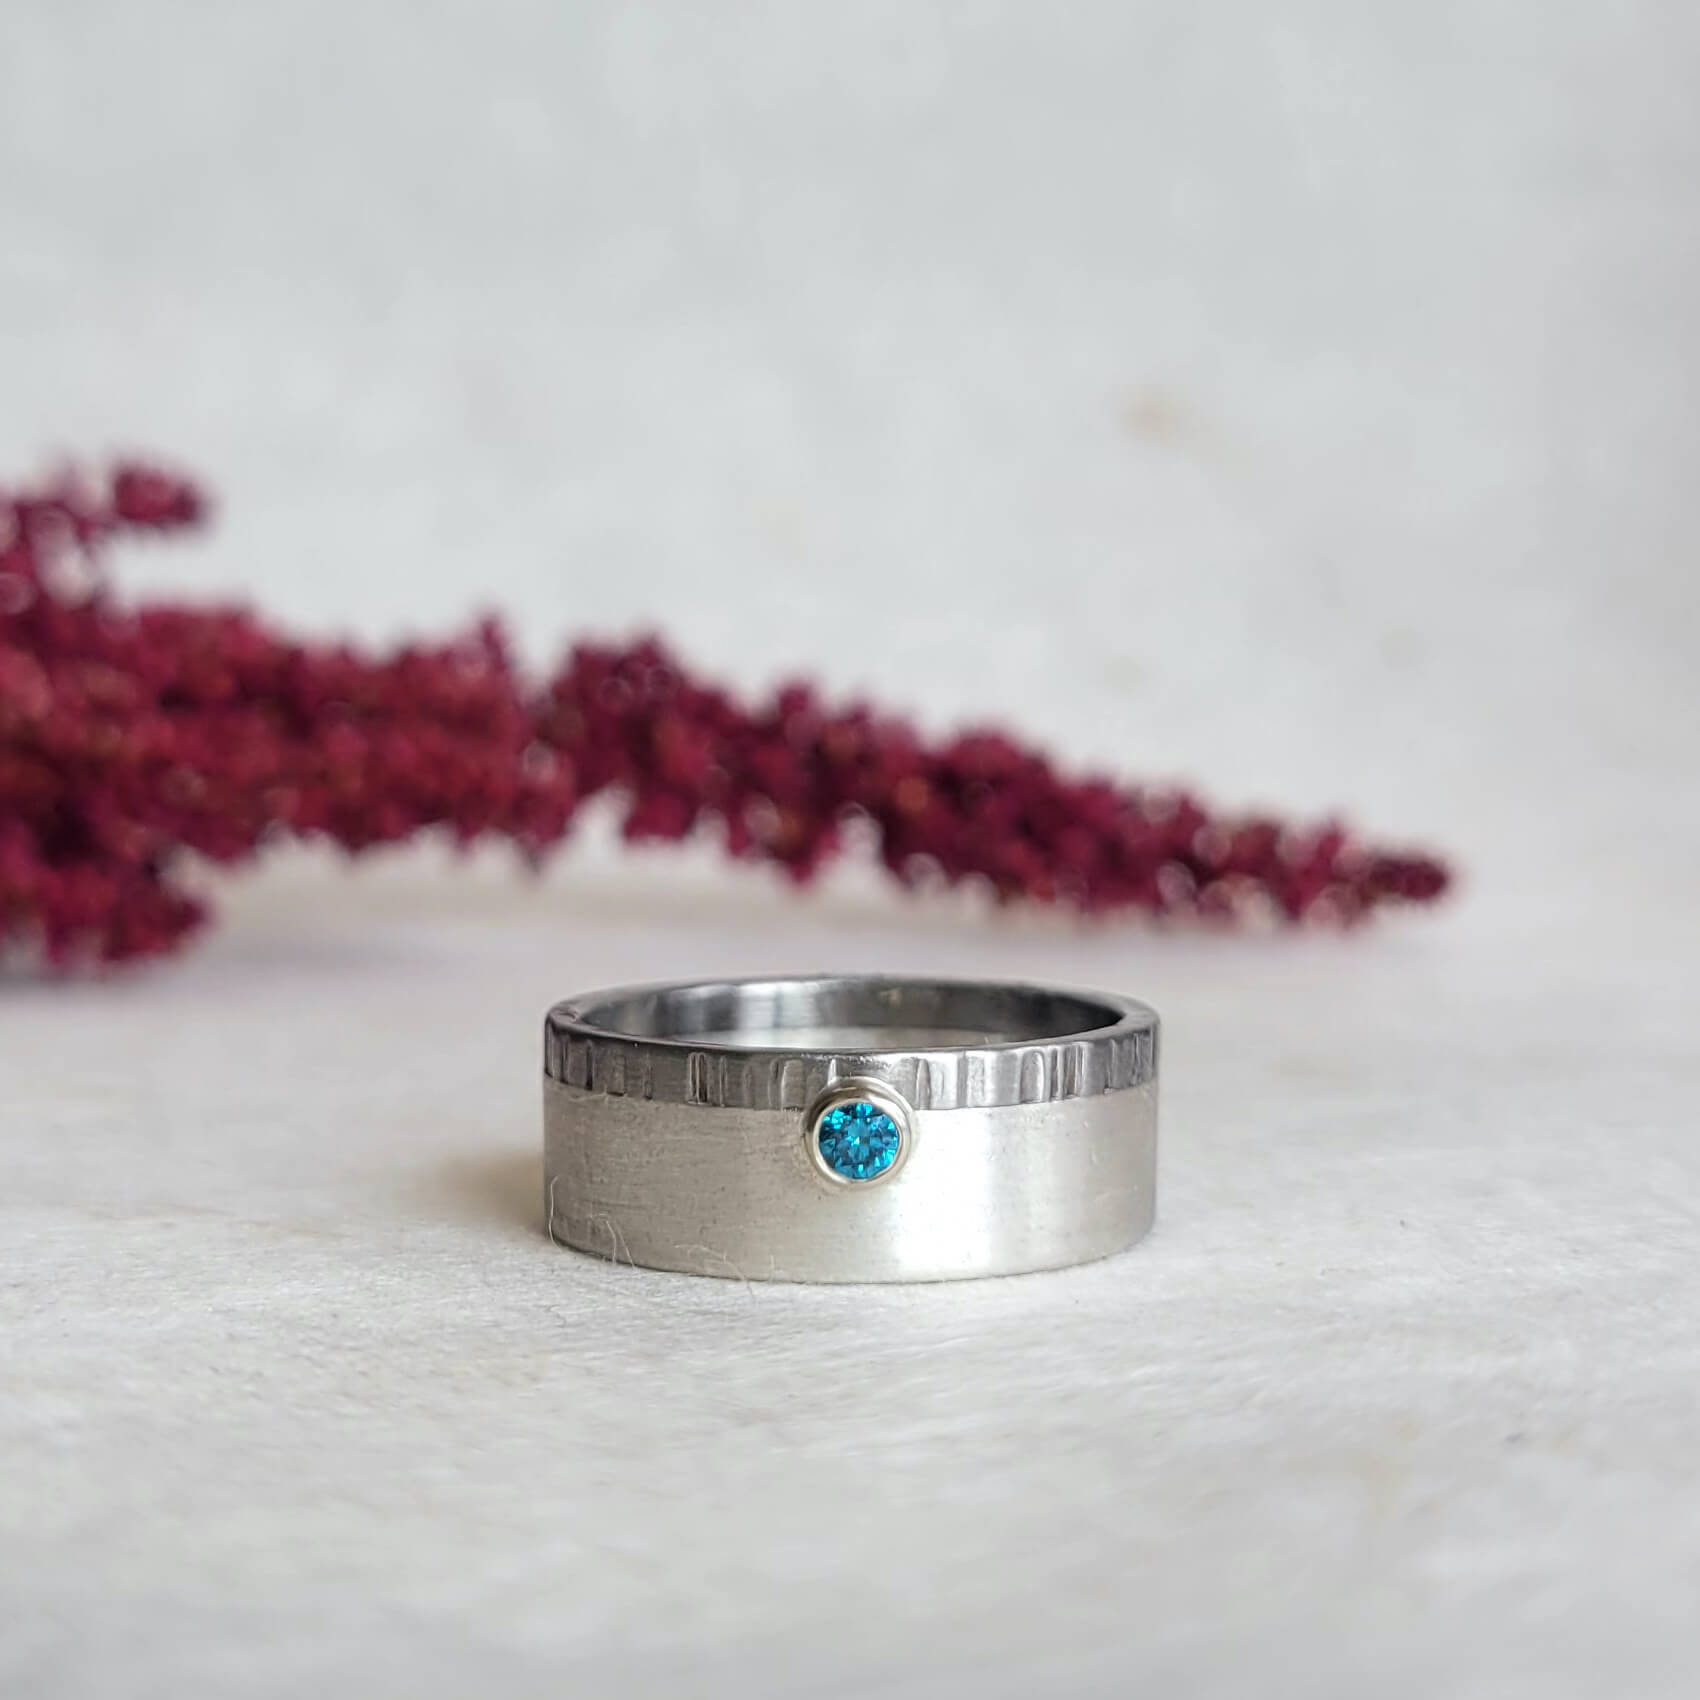 Mixed metal wedding band with blue diamond accent. Handmade by EC Design Jewelry in Minneapolis, MN.